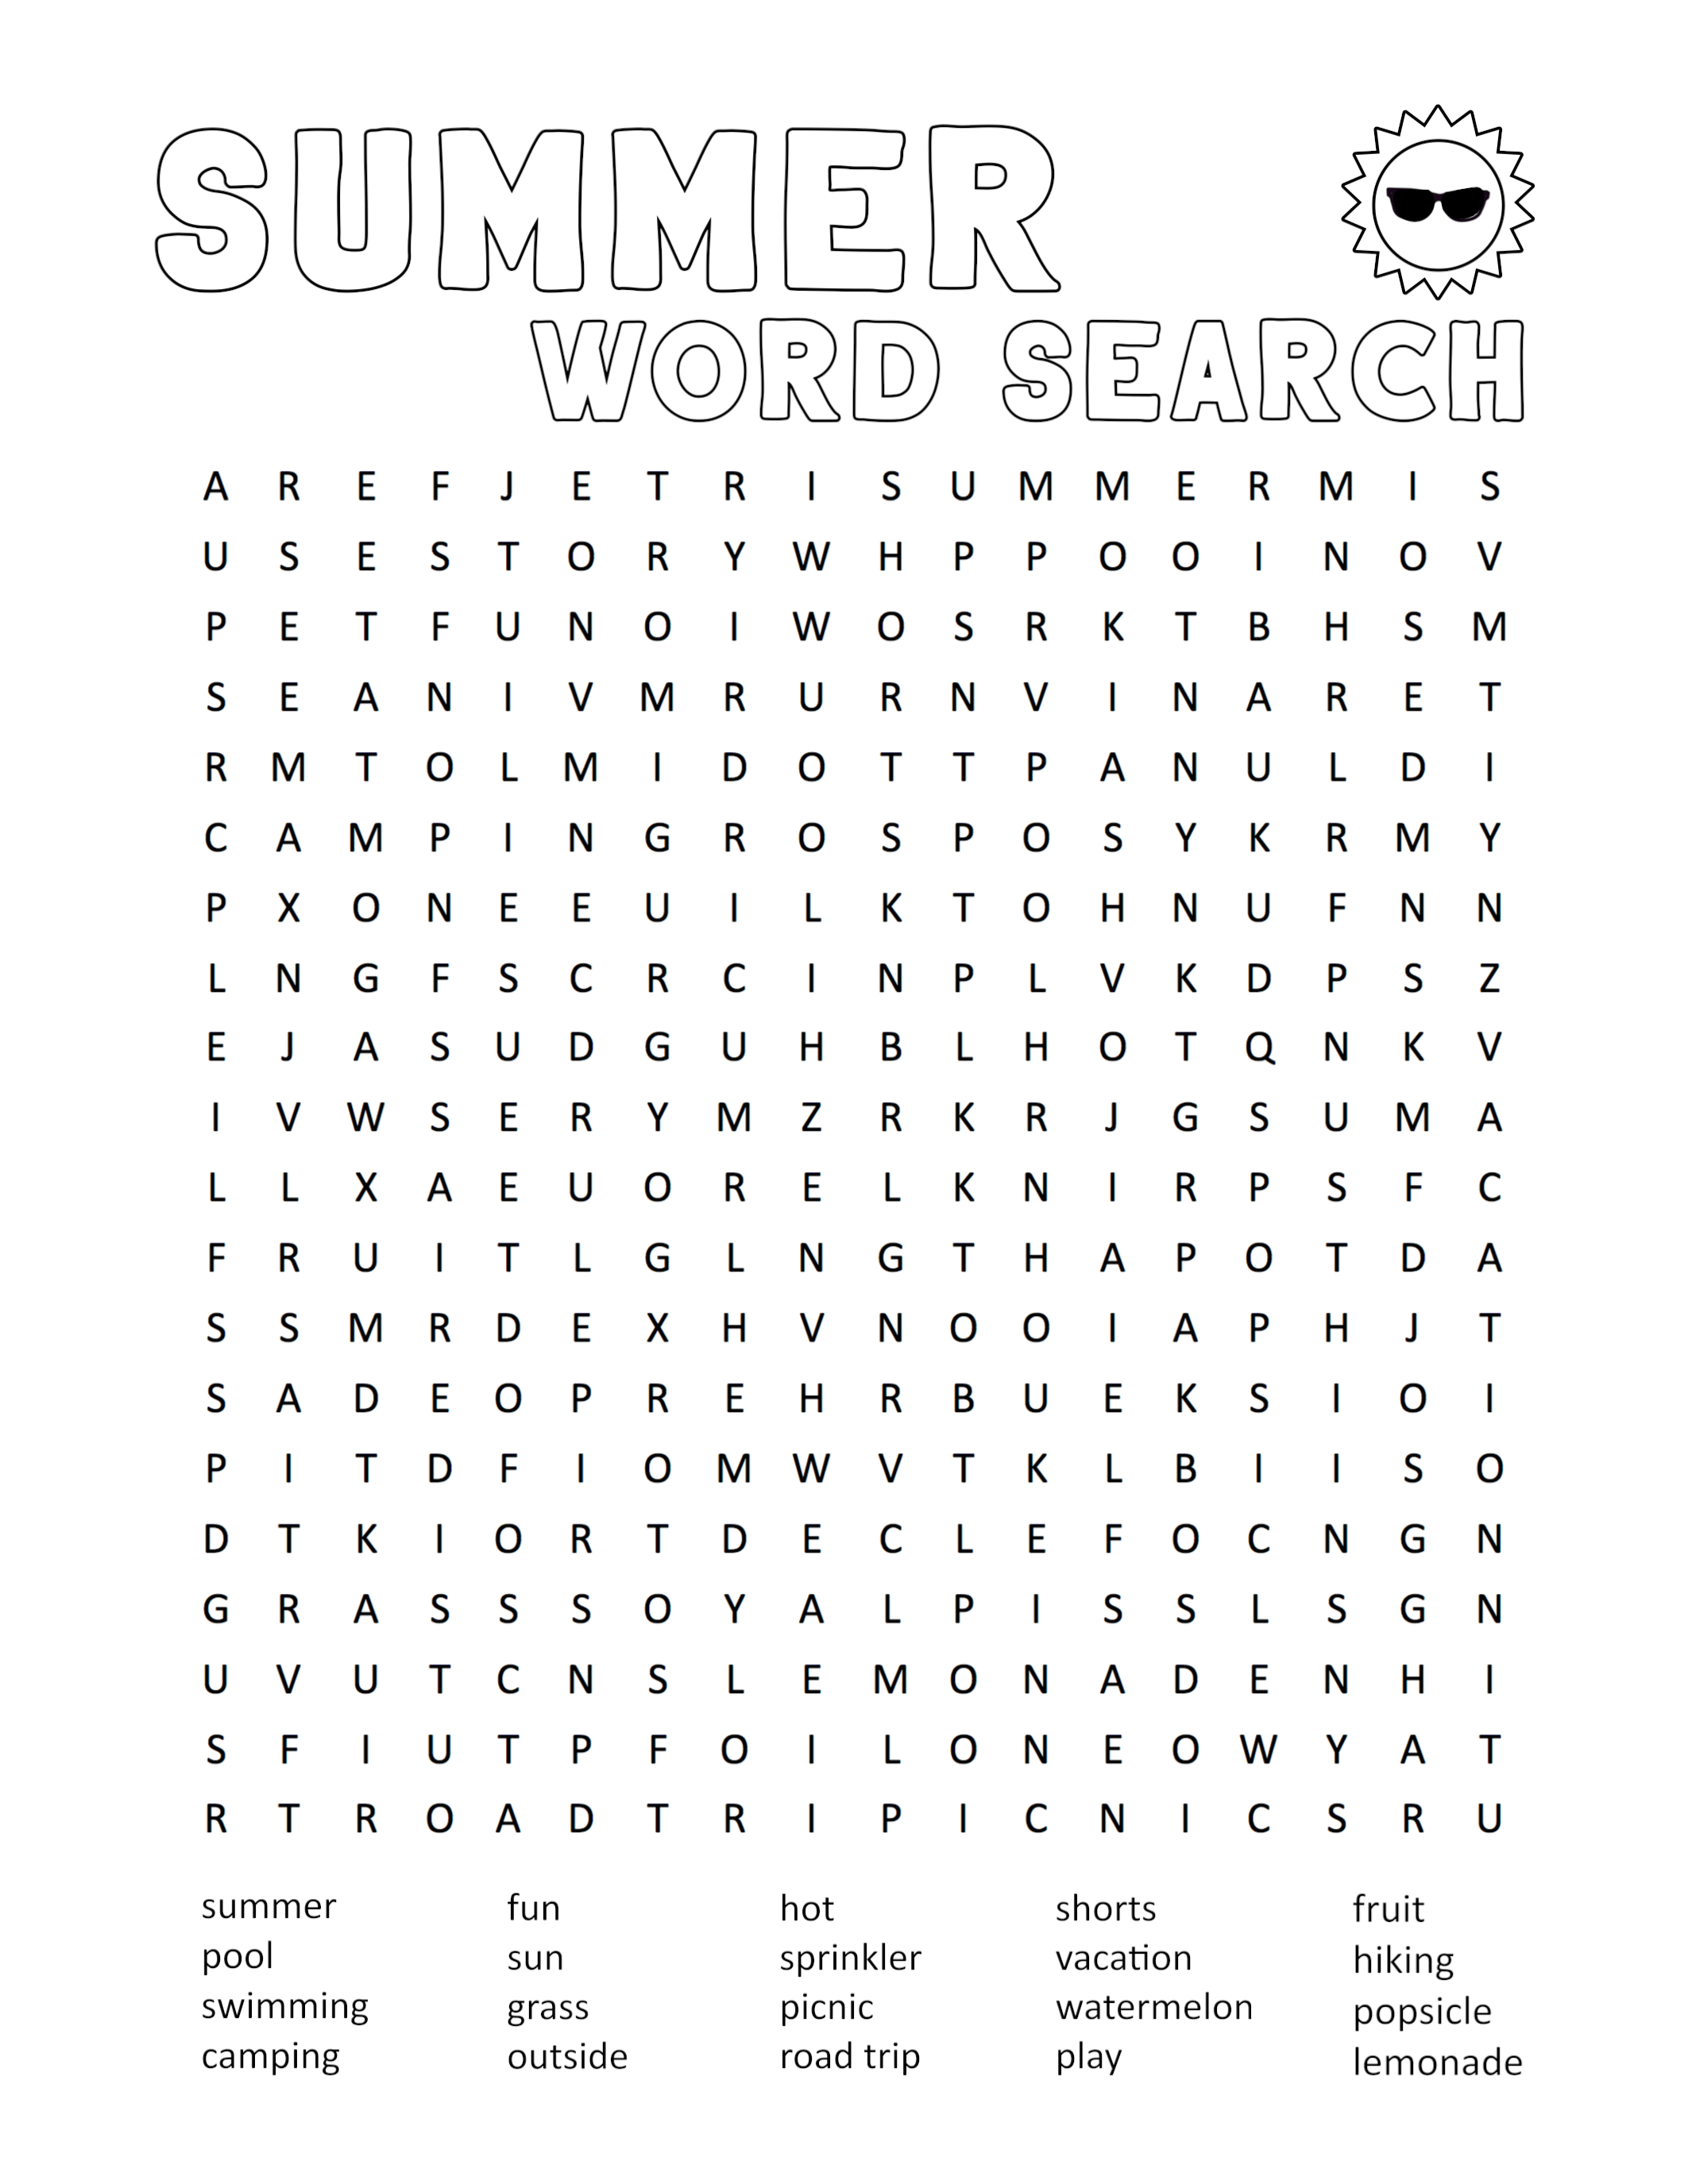 Summer Word Search Printable Free